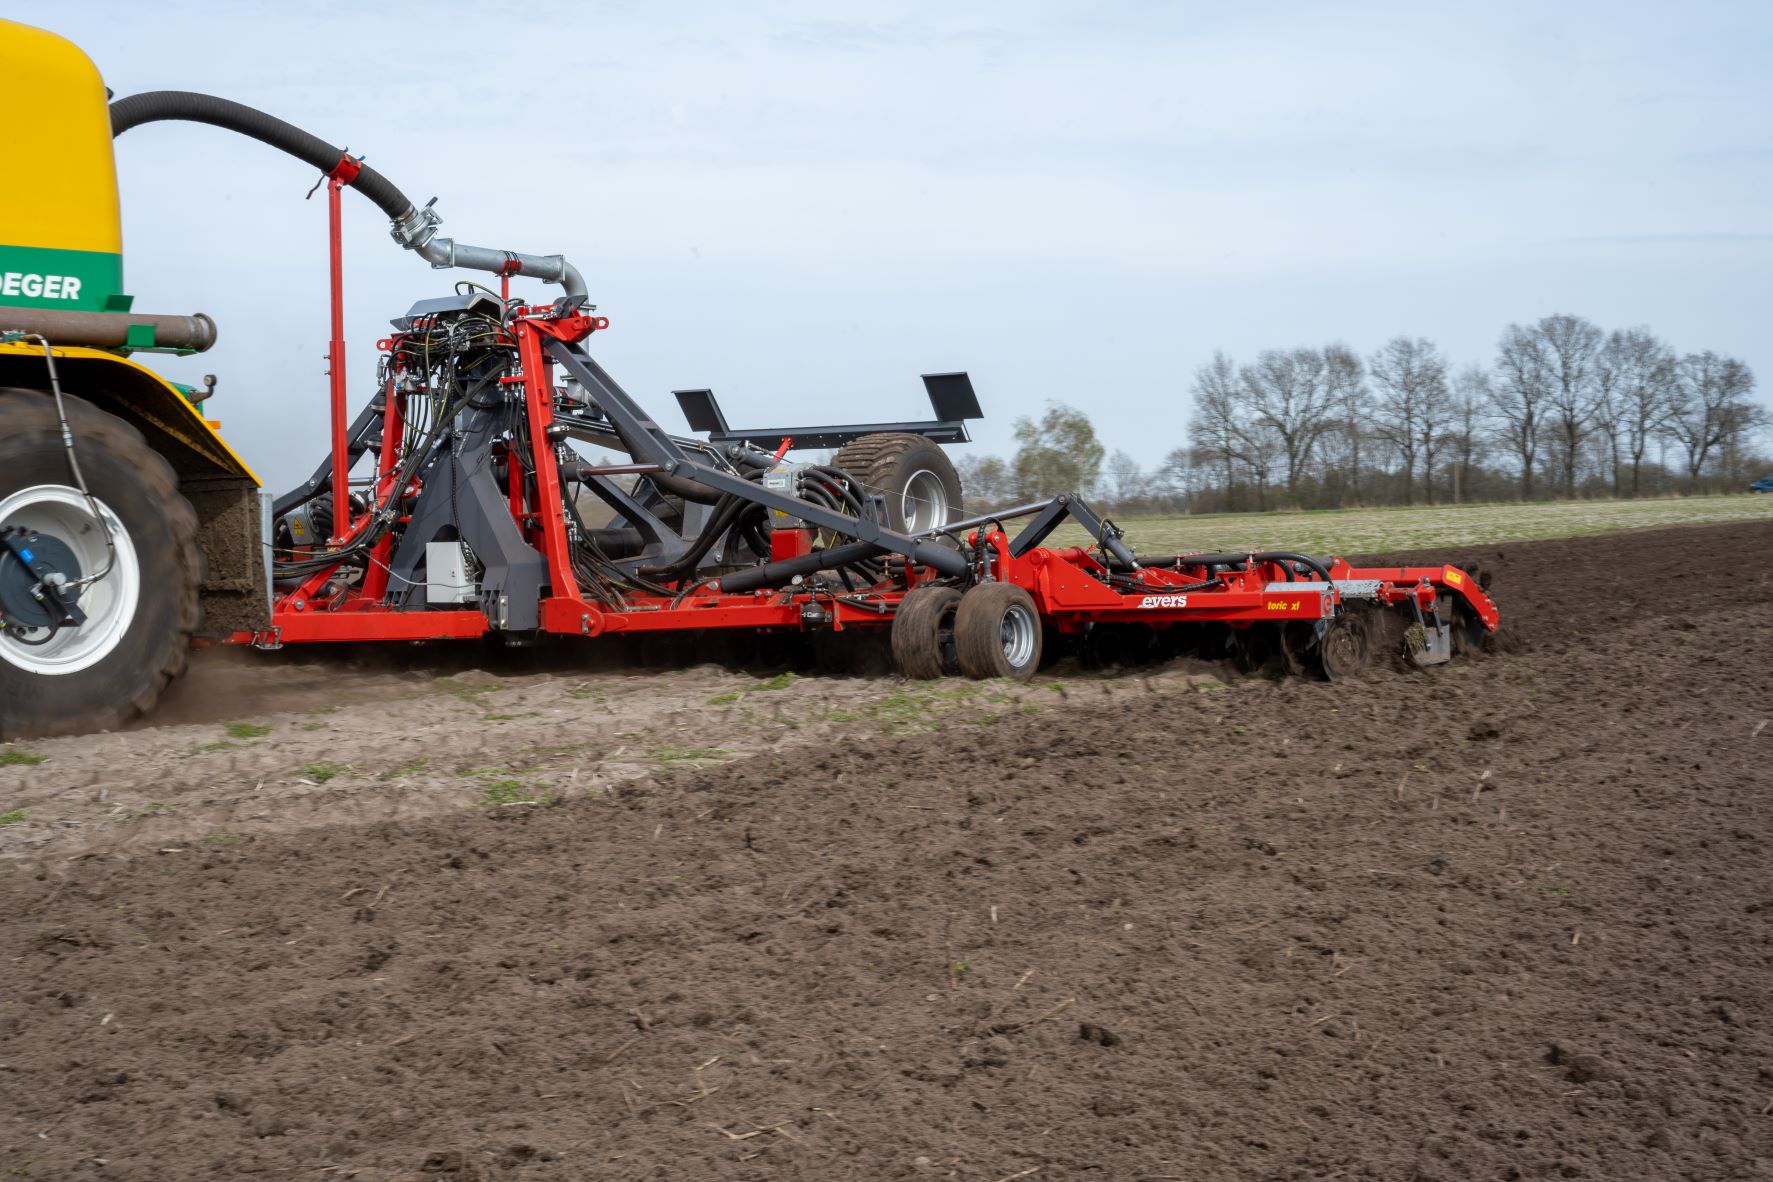 Evers slurry disc harrow, Type Toric XL 1200, with rubber suspended discs for optimal following ground comntours